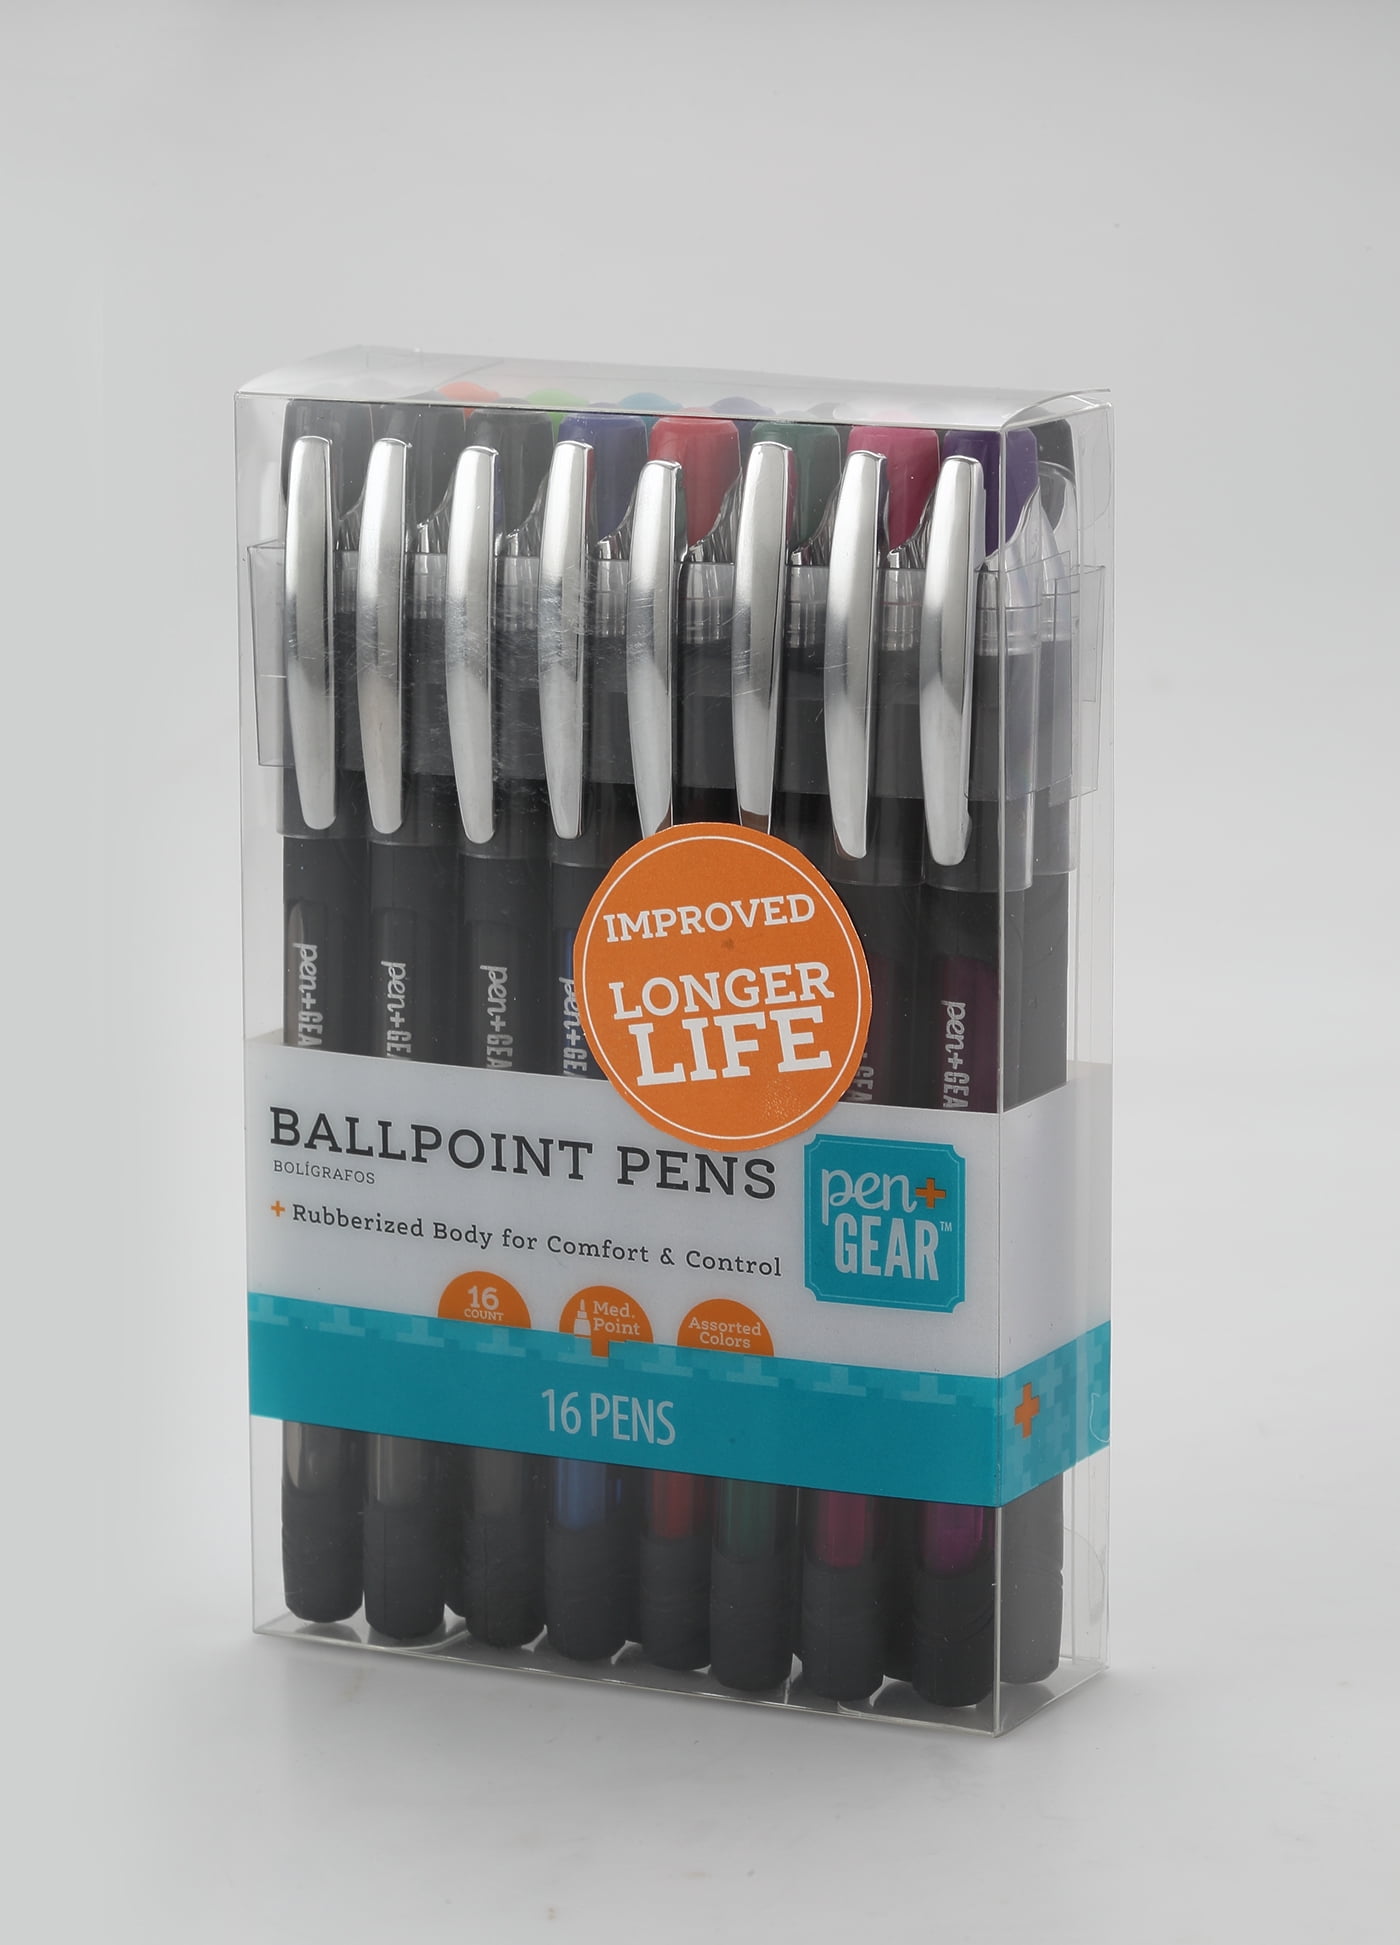 20 Amazing Pens Guaranteed to Brighten Any Teacher's Day